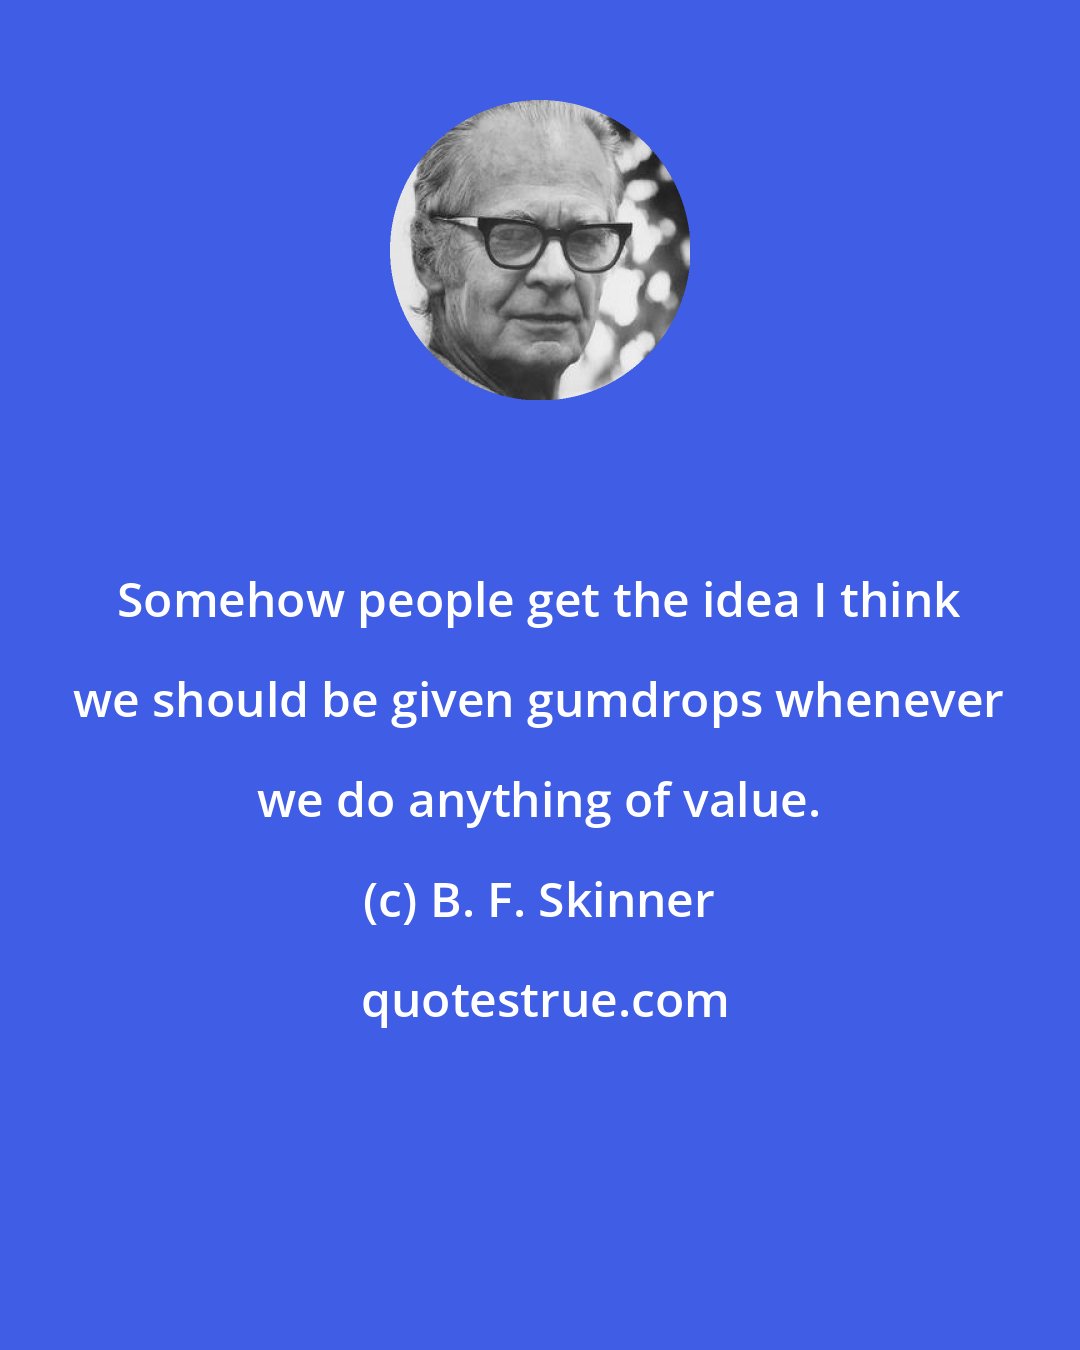 B. F. Skinner: Somehow people get the idea I think we should be given gumdrops whenever we do anything of value.